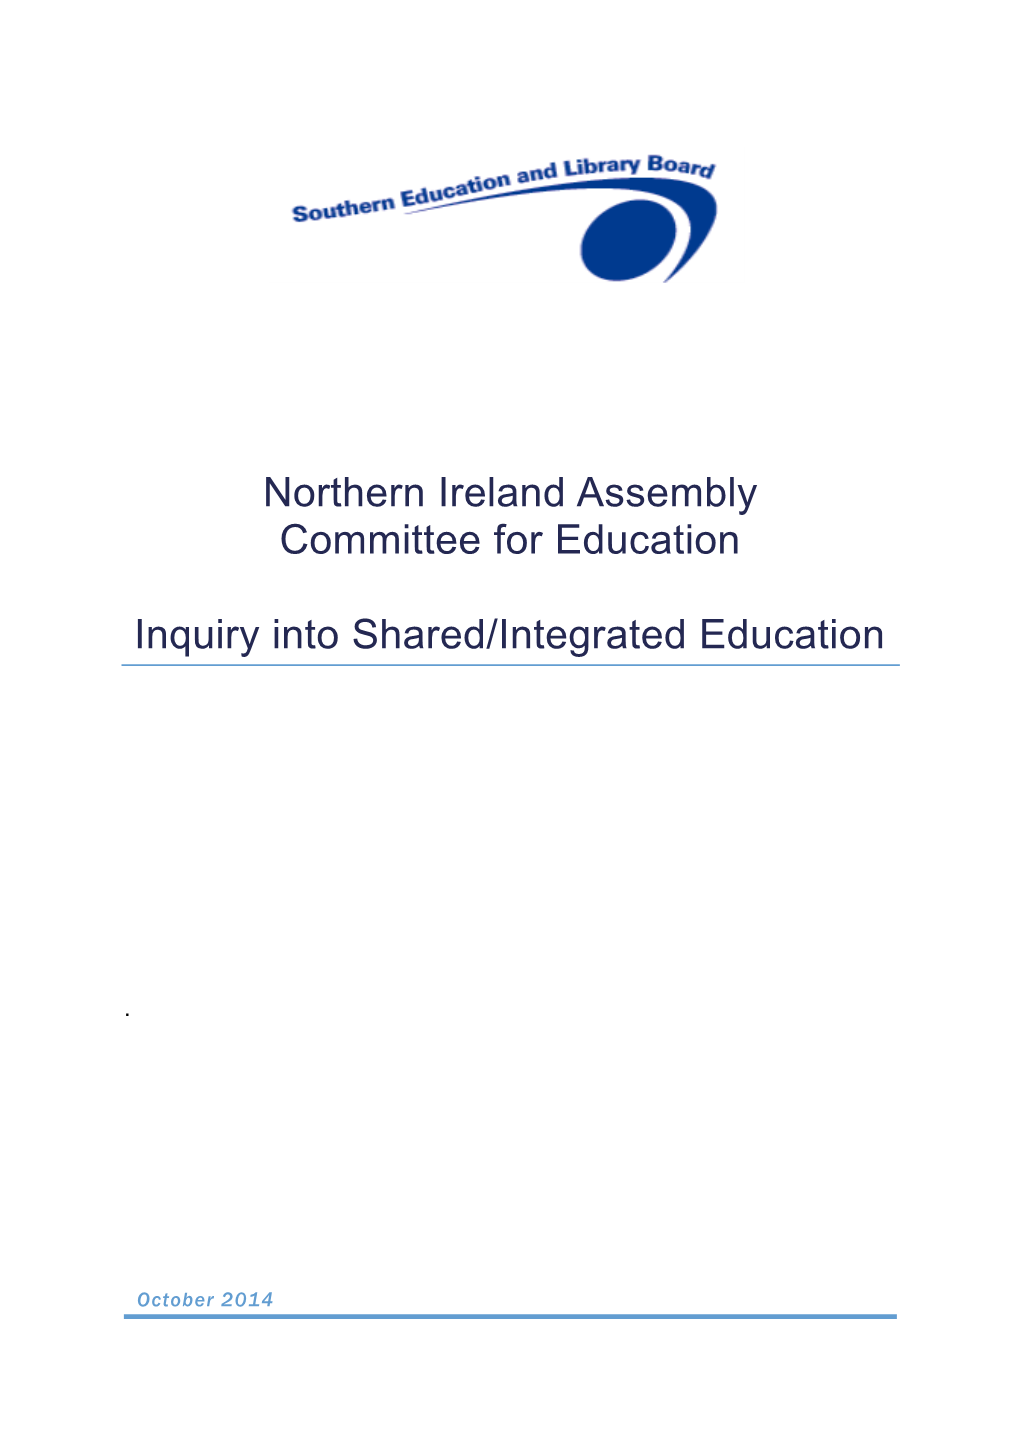 Inquiry Into Shared/Integrated Education